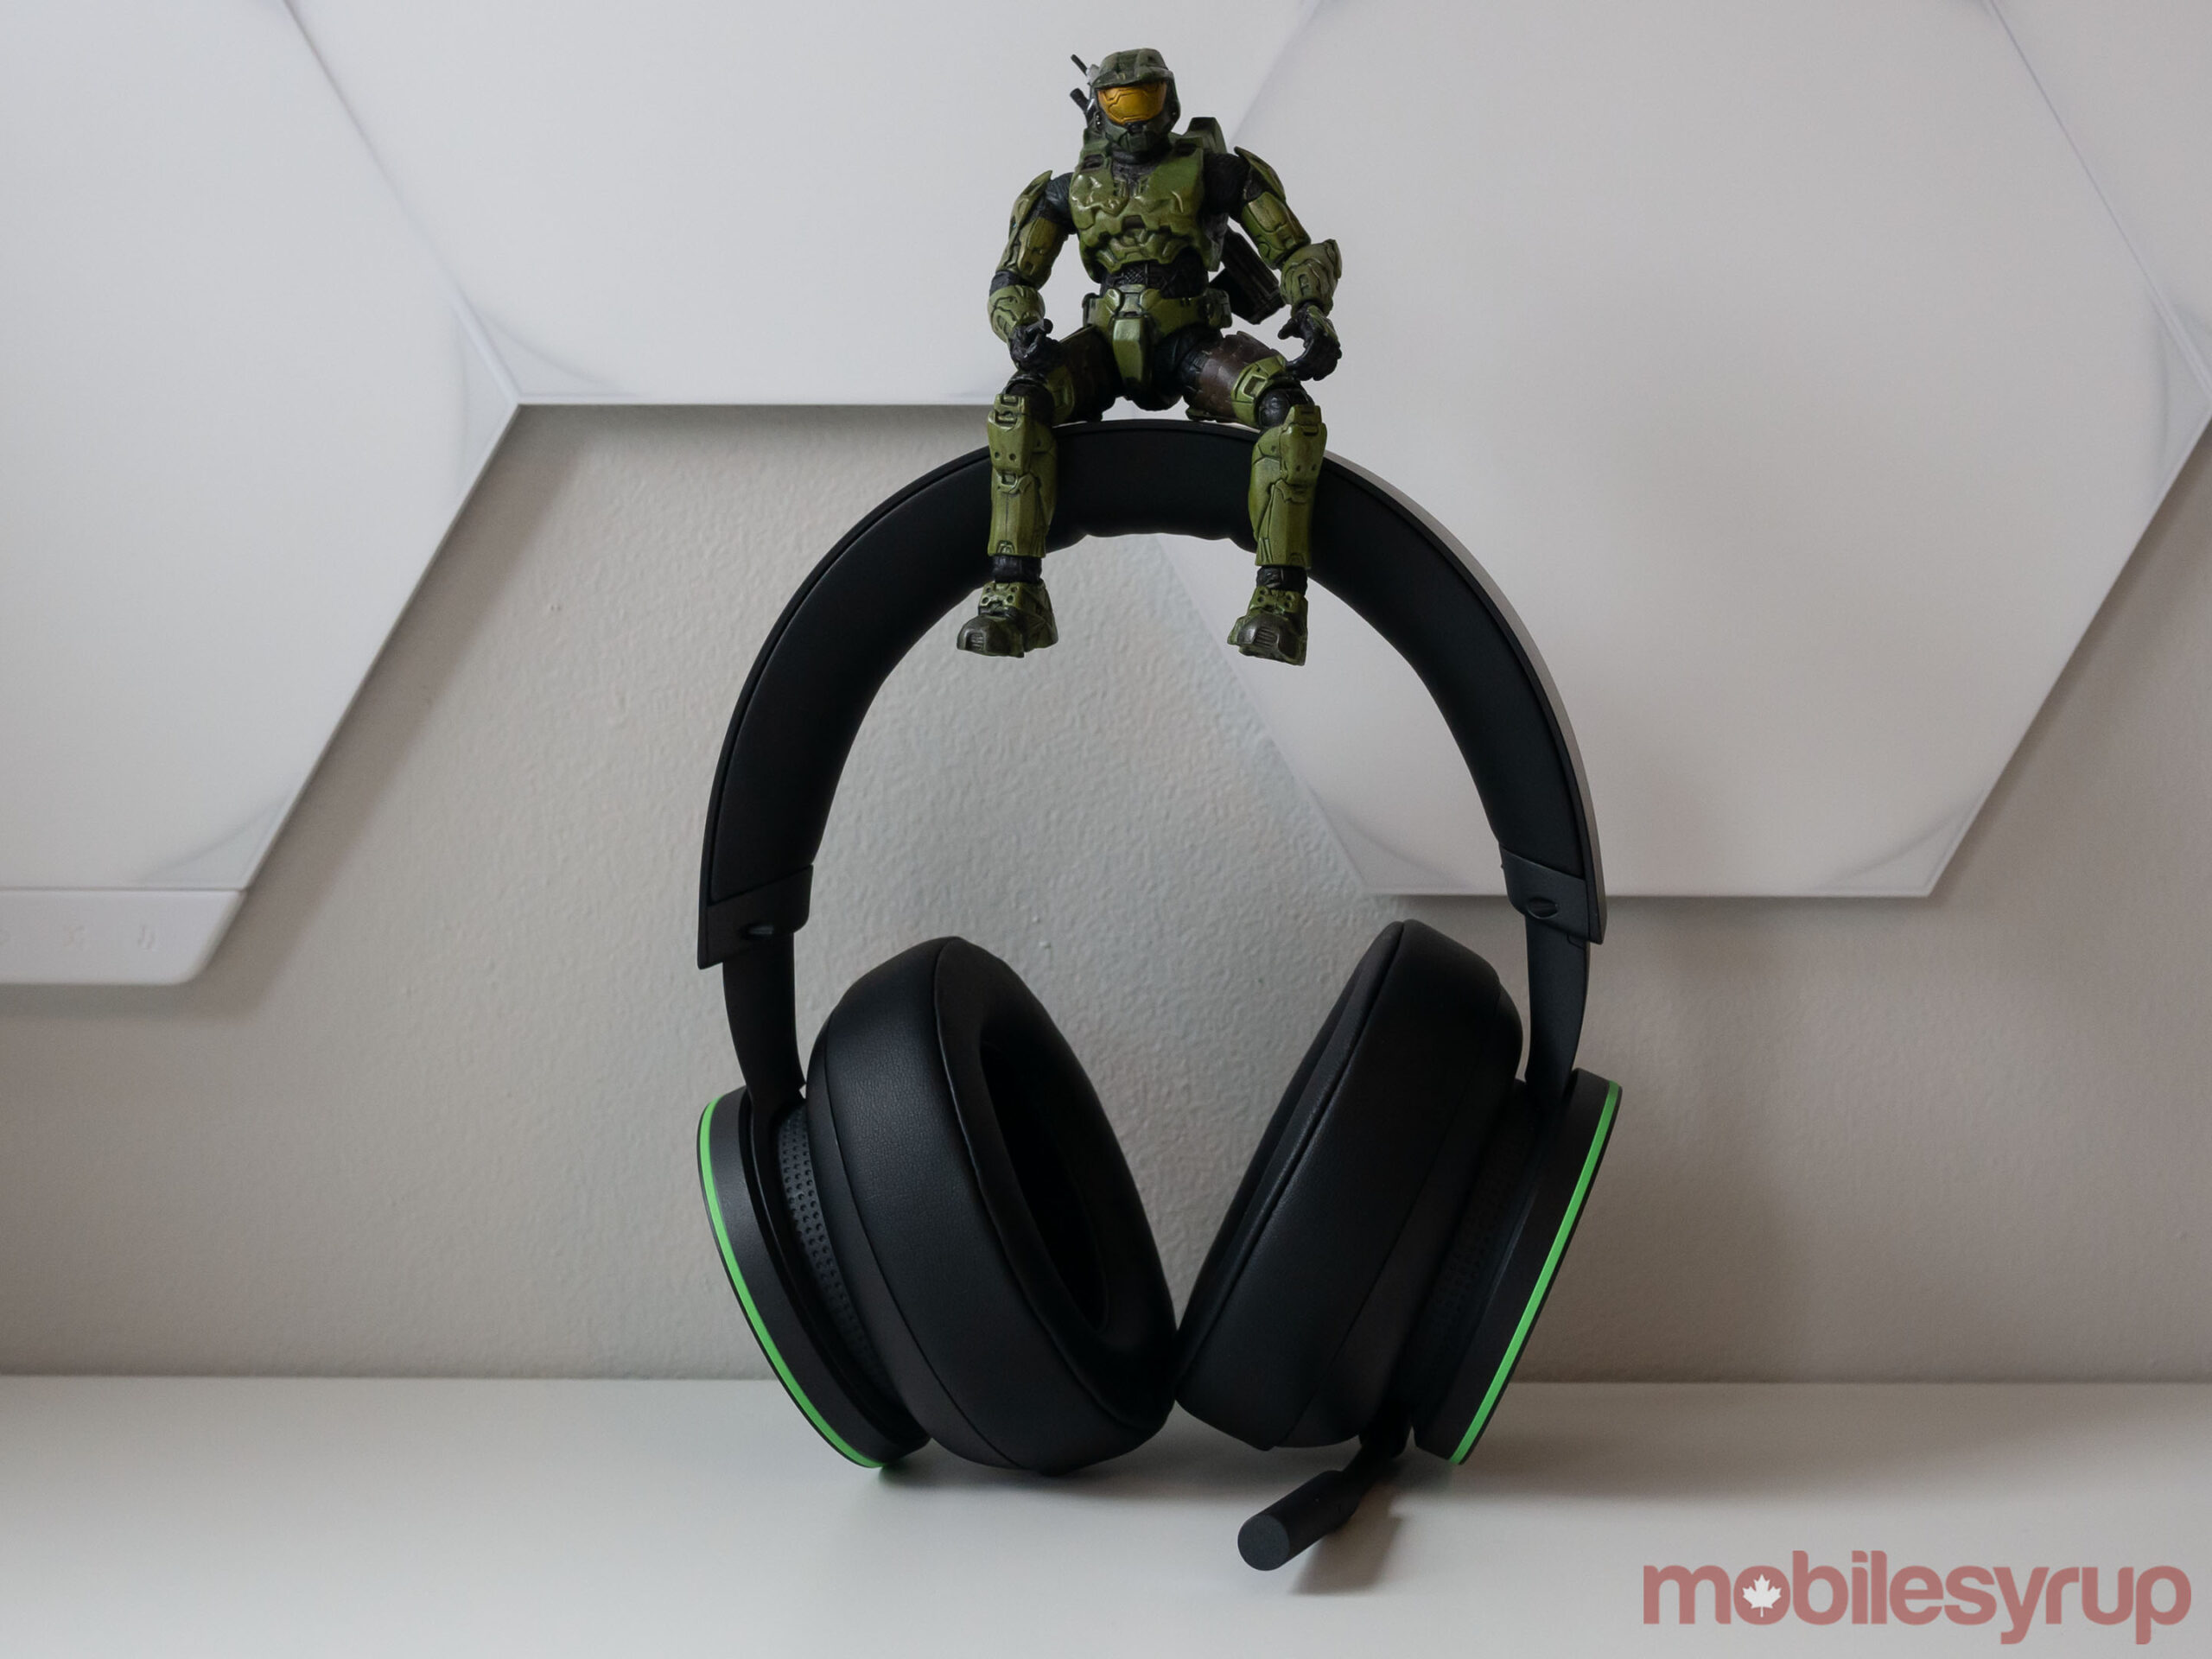 Xbox Wireless Headset with the Master Chief sitting on it 